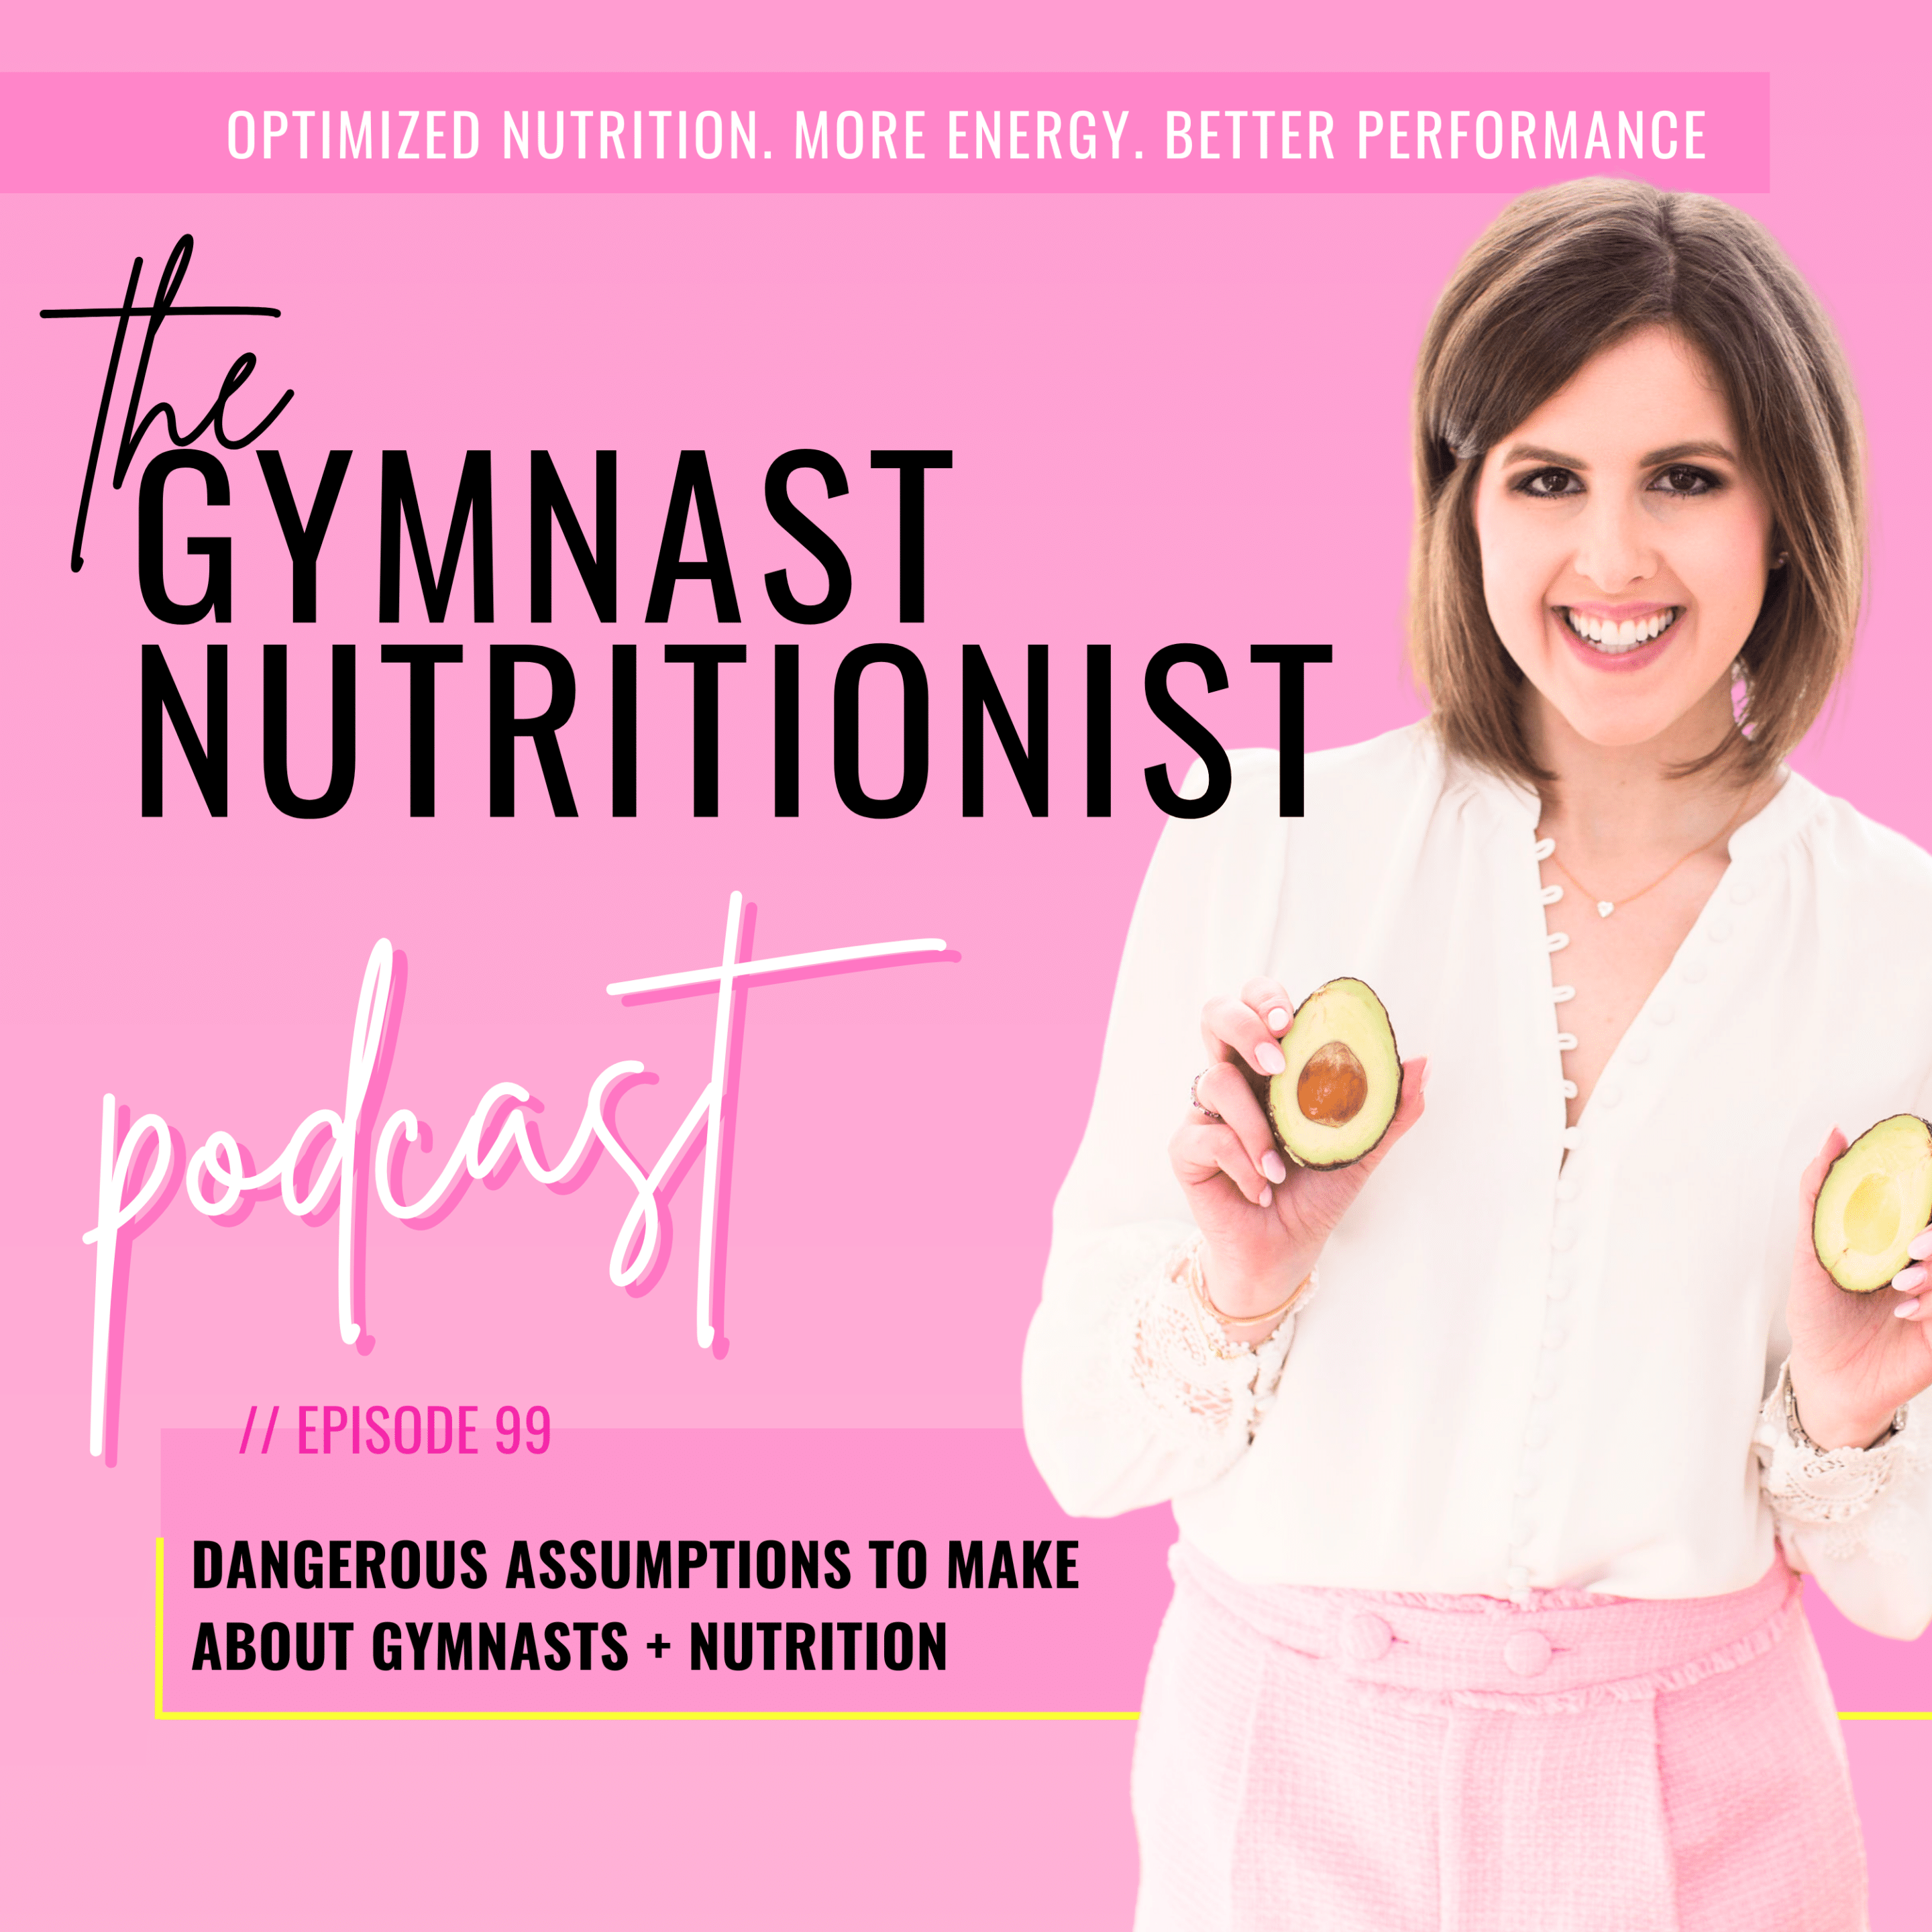 Episode 99 Dangerous Assumptions to Make about Gymnasts + Nutrition